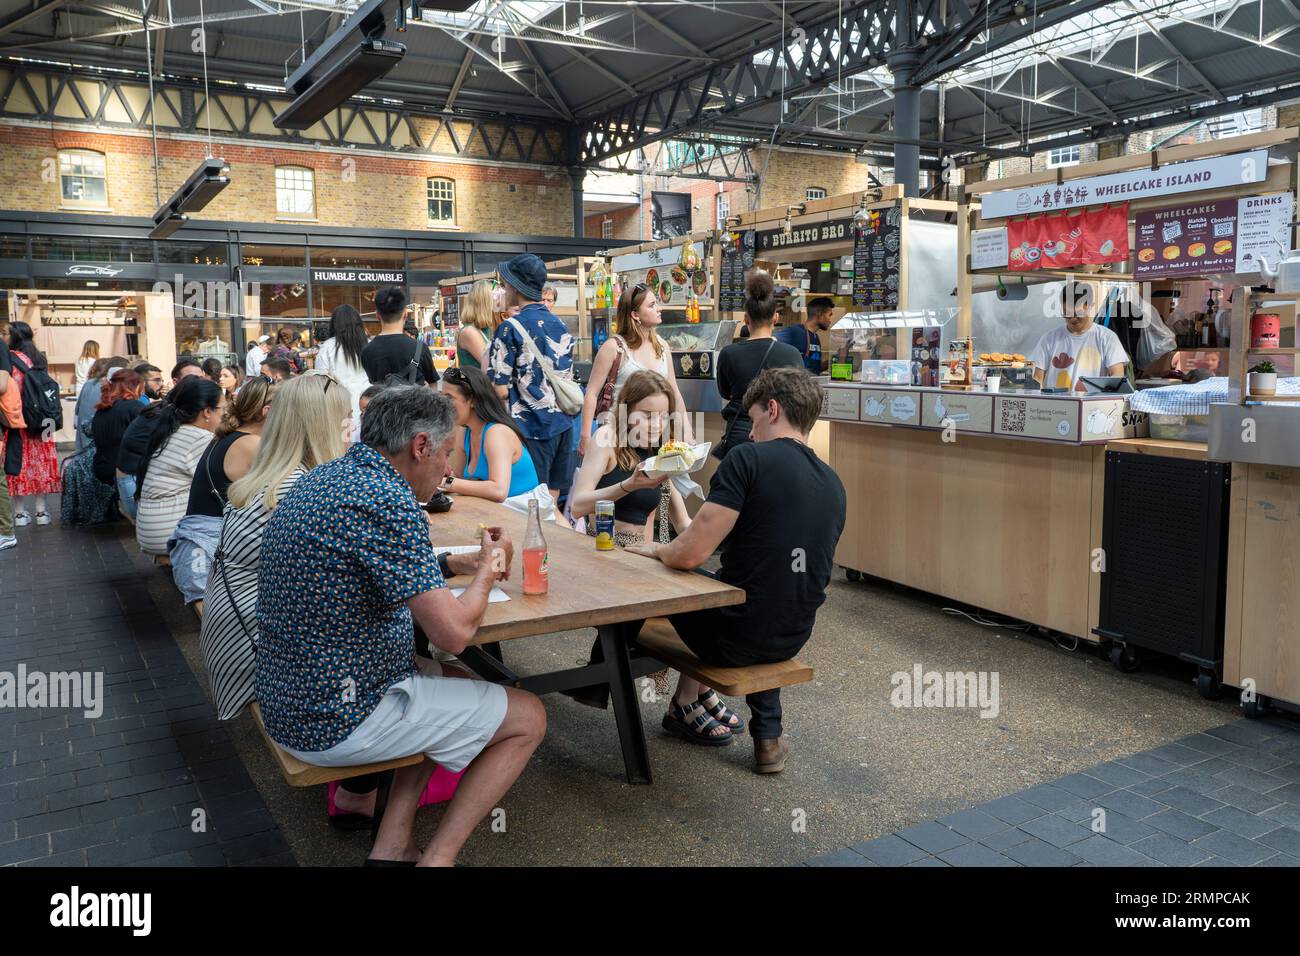 People sitting down to eat and drink at street food and takeaway food stalls in the Old Spitalfields covered market. Spitalfields, London, UK Stock Photo